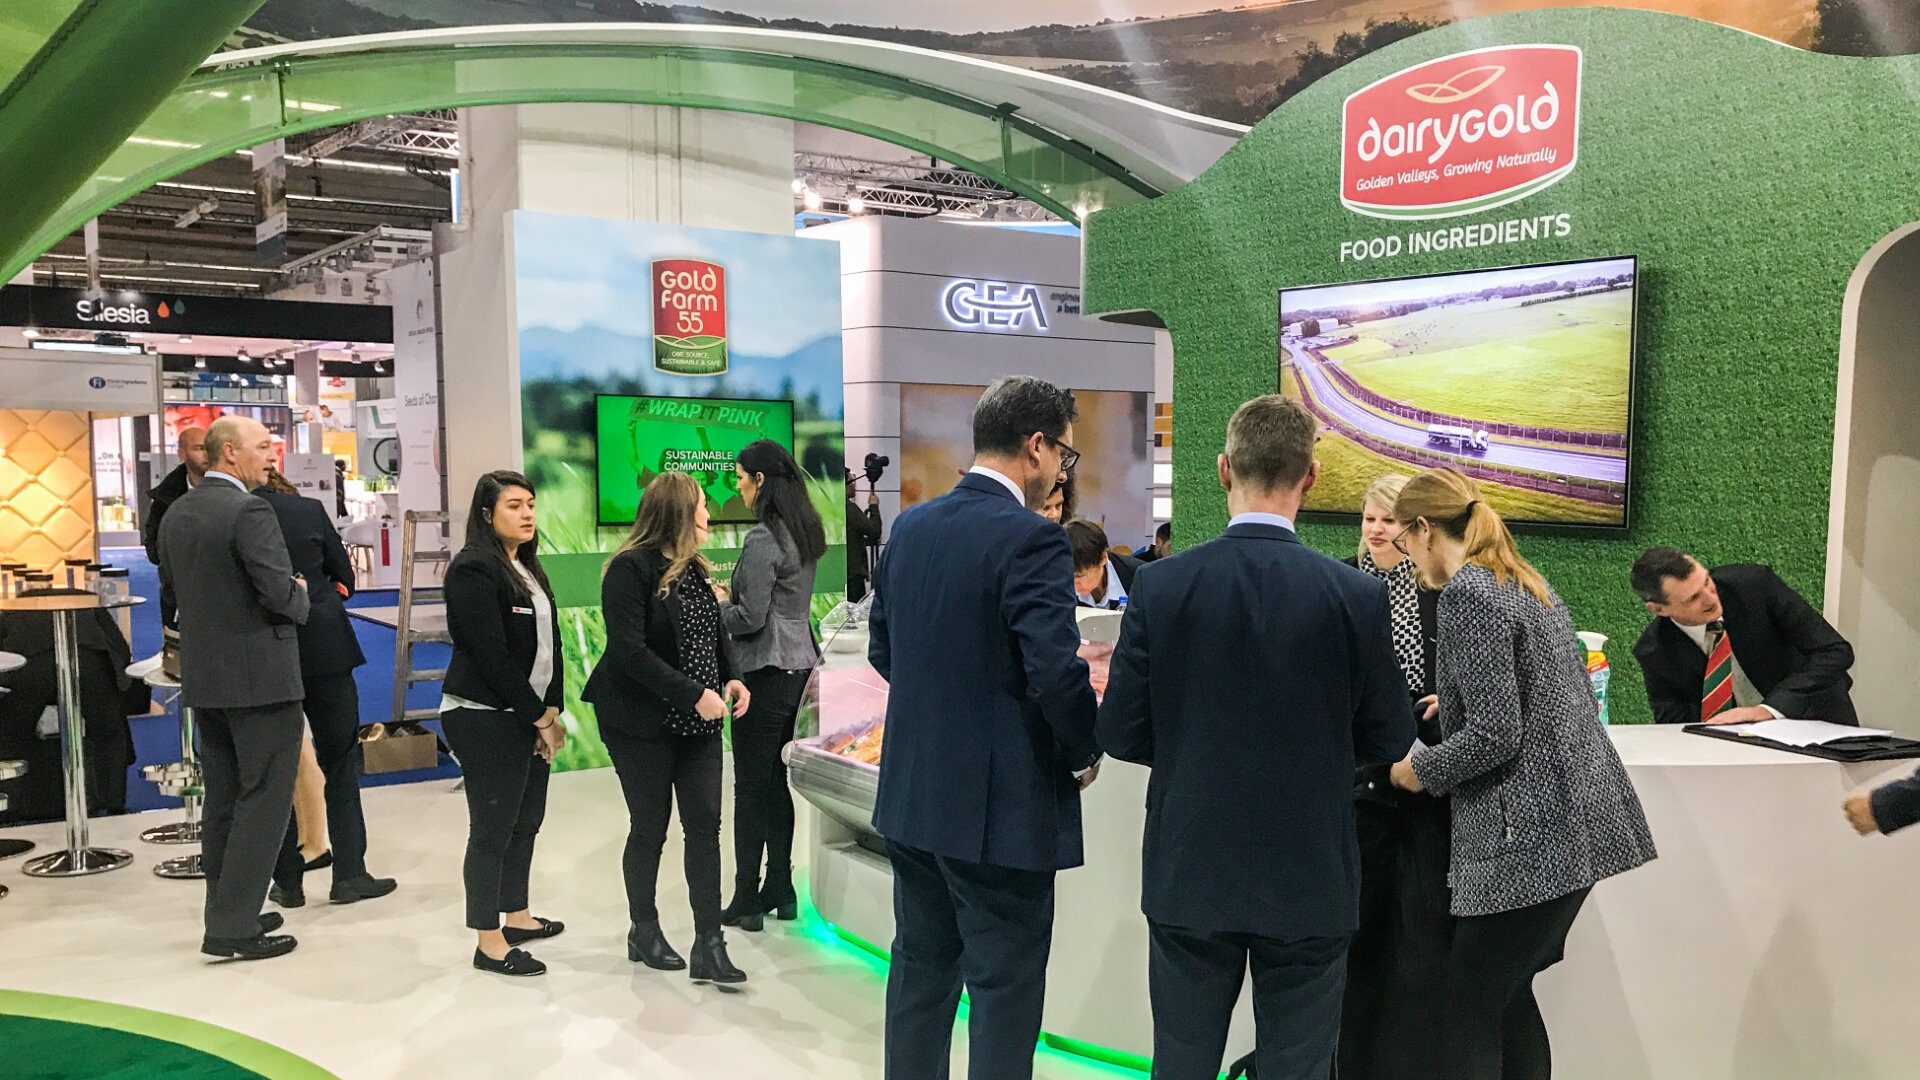 dairy gold representatives and visitors interacting with an exhibition